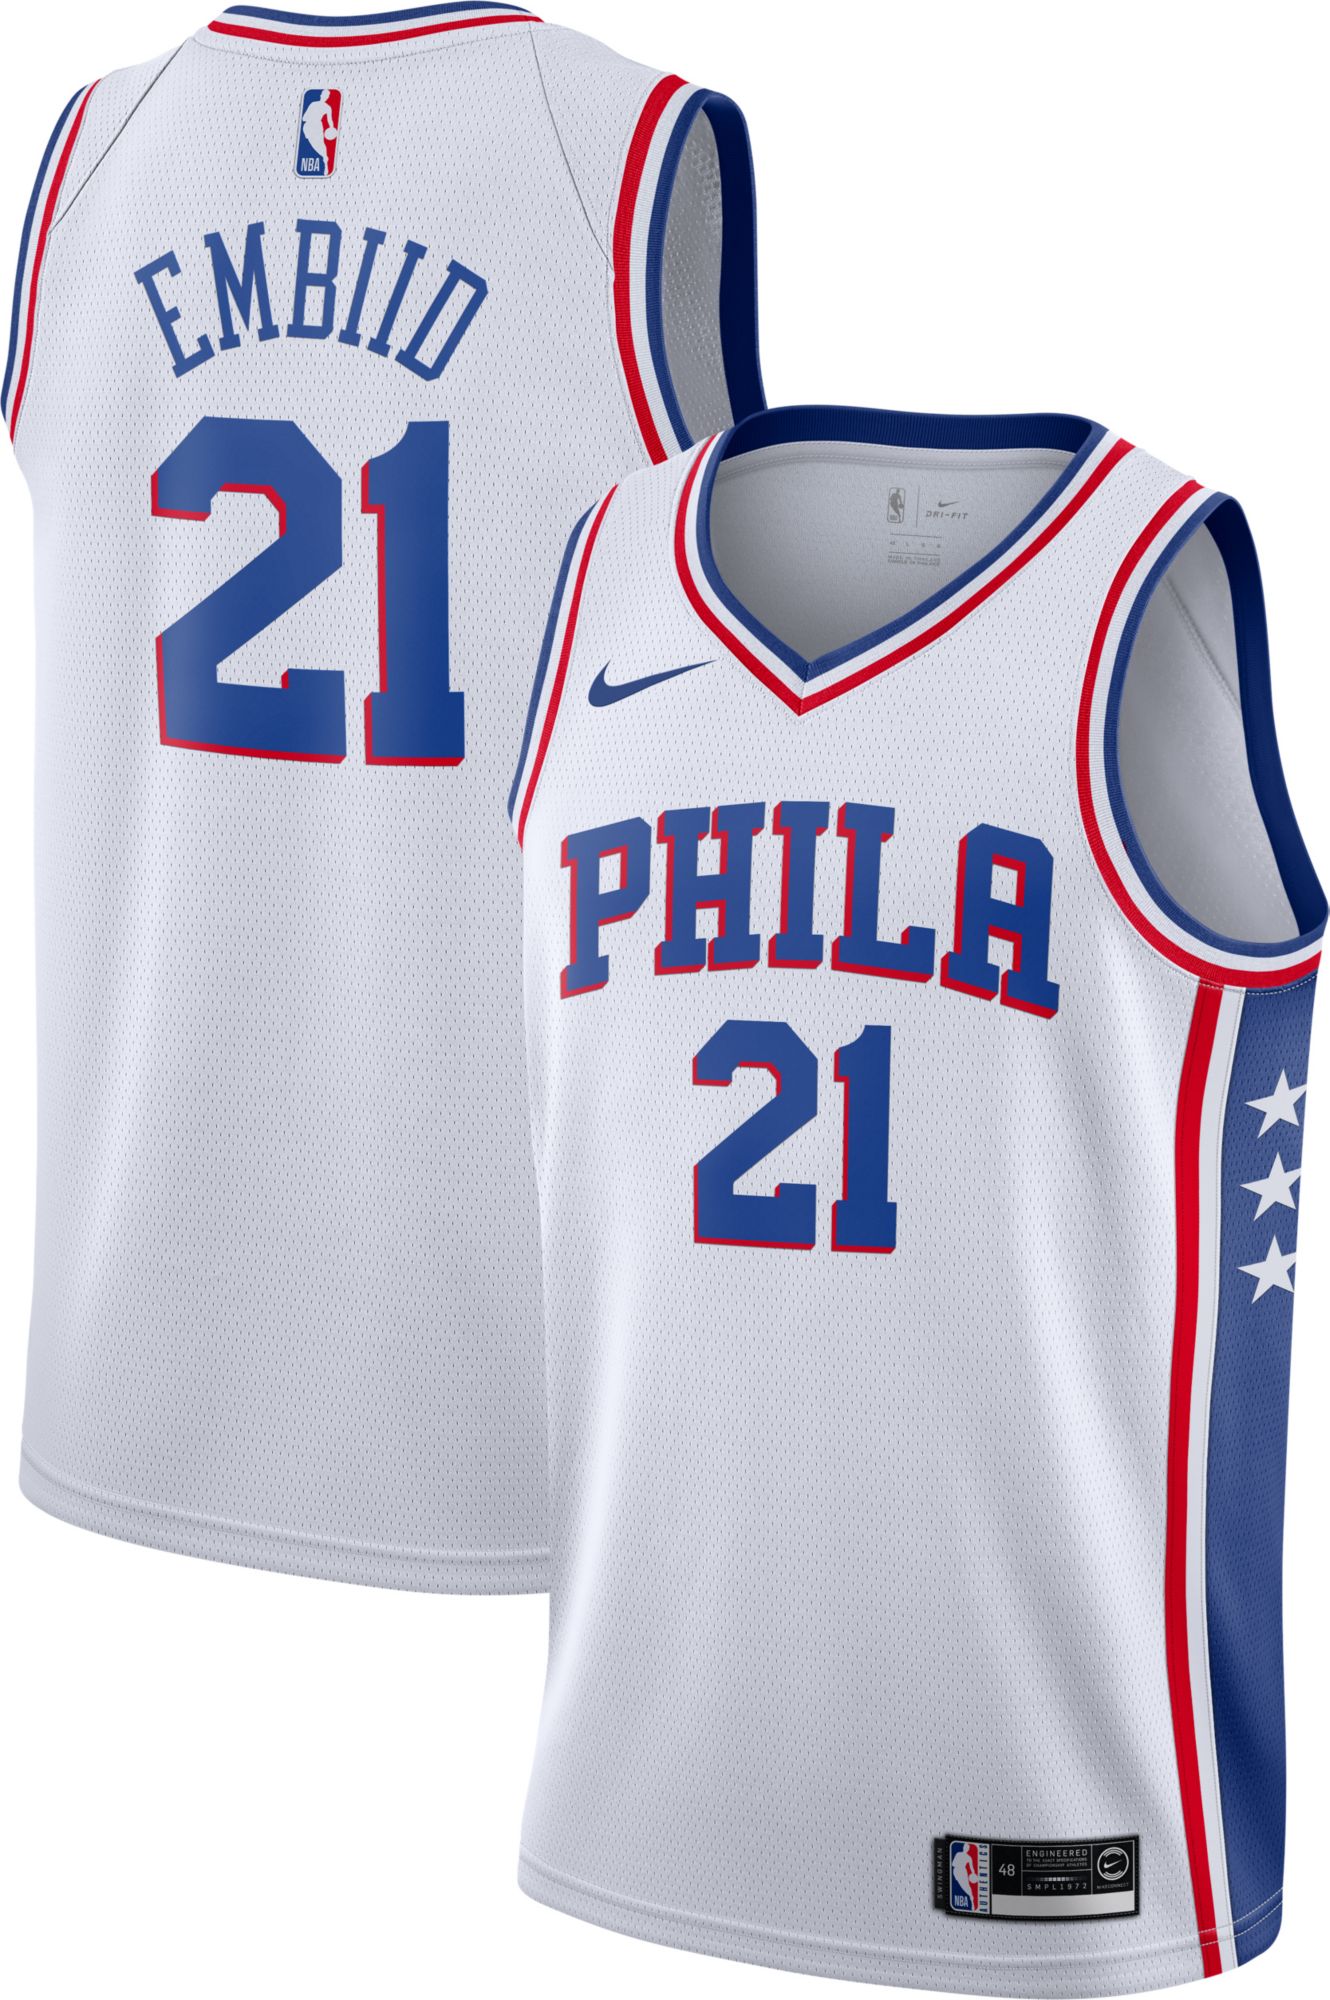 76ers 21 jersey